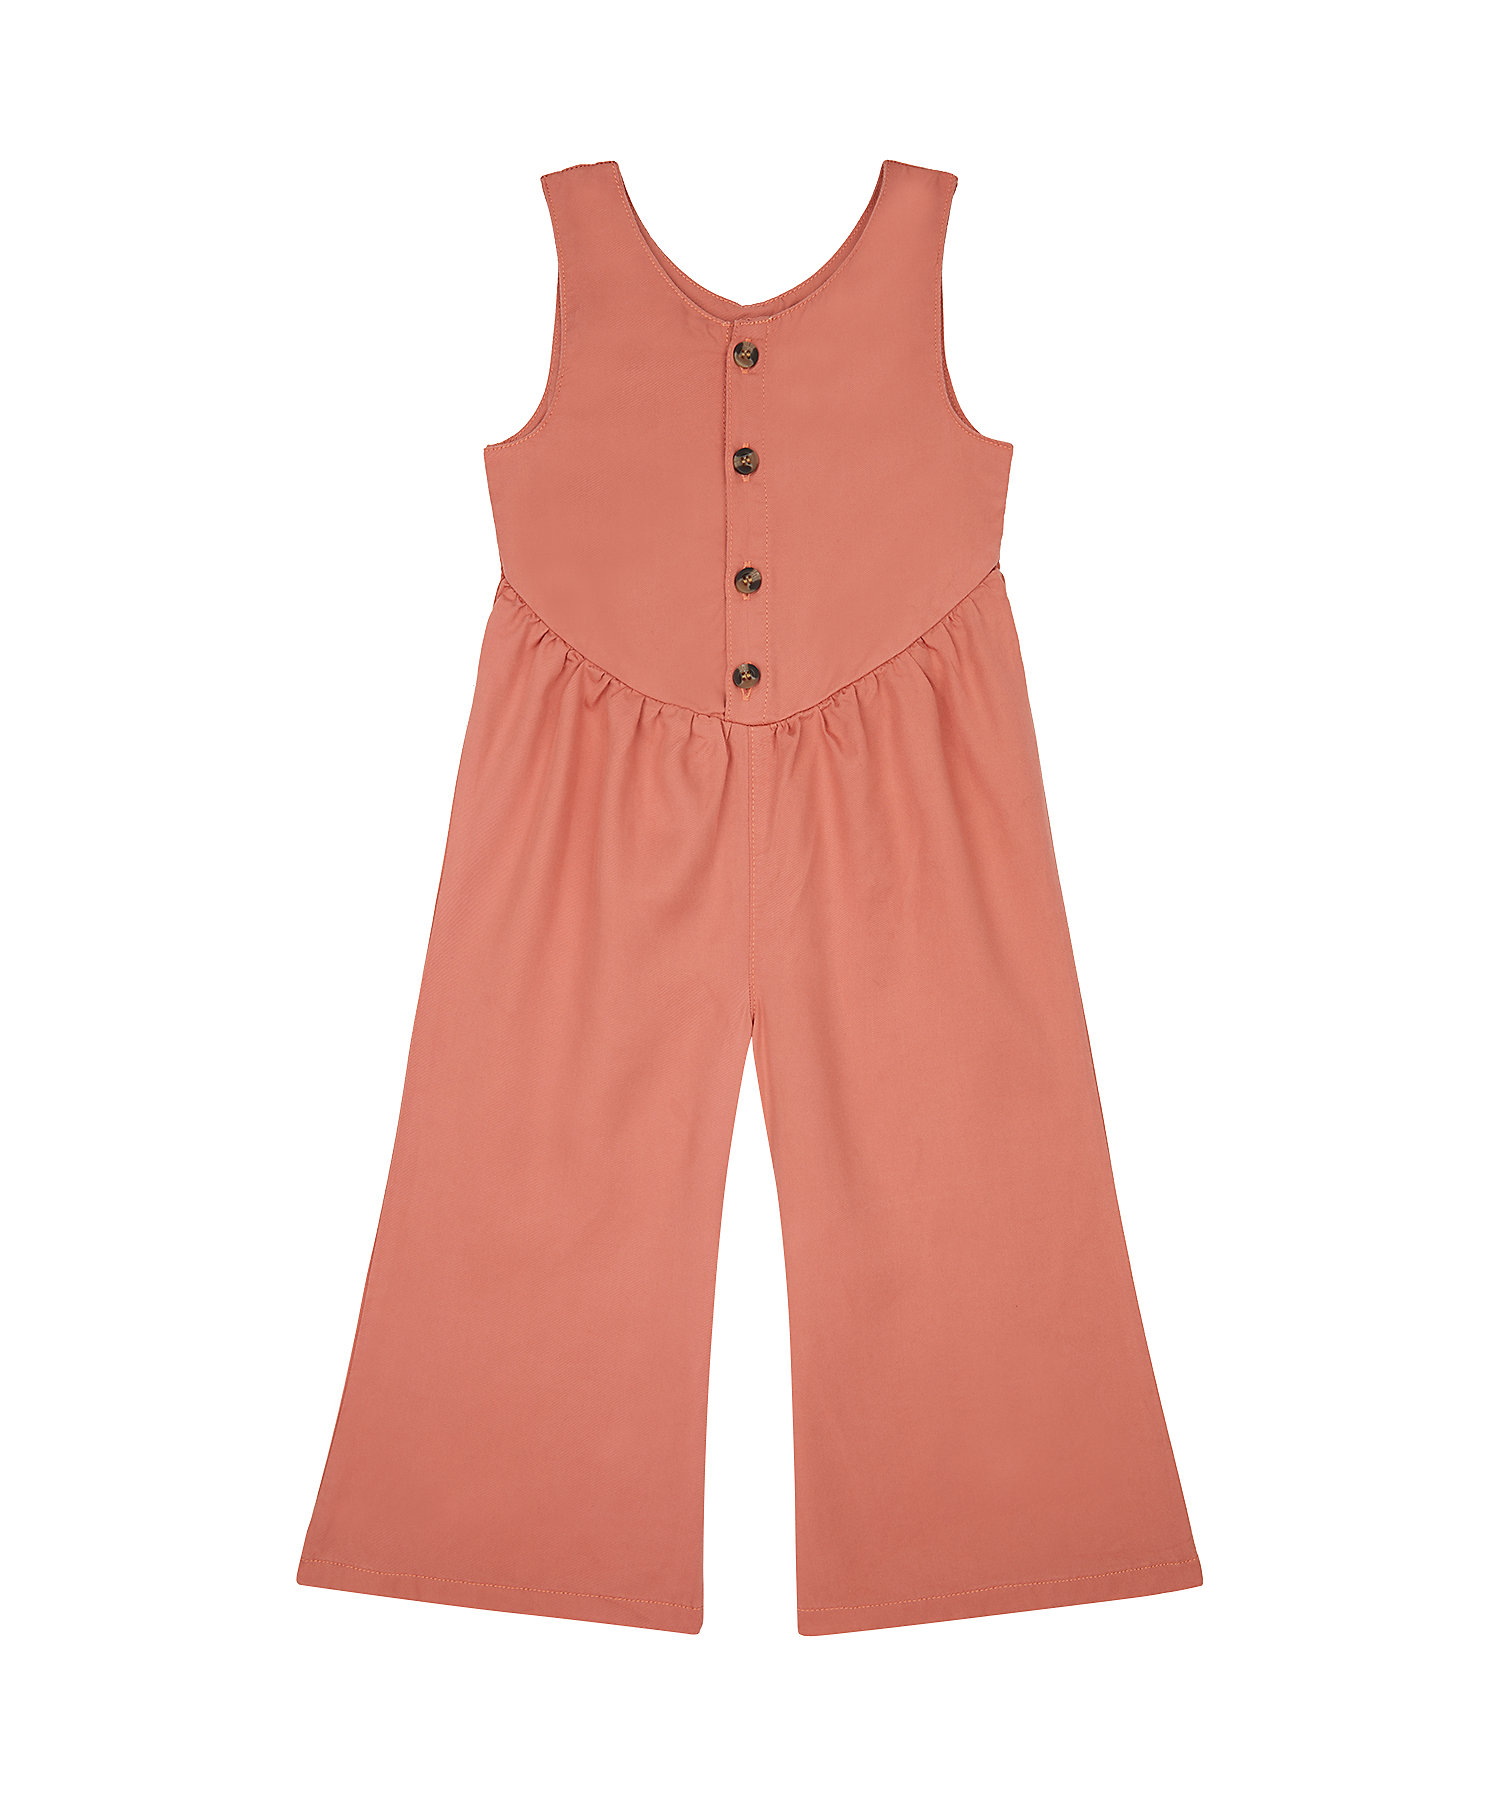 Mothercare Girls Solid Pink Jump Suit